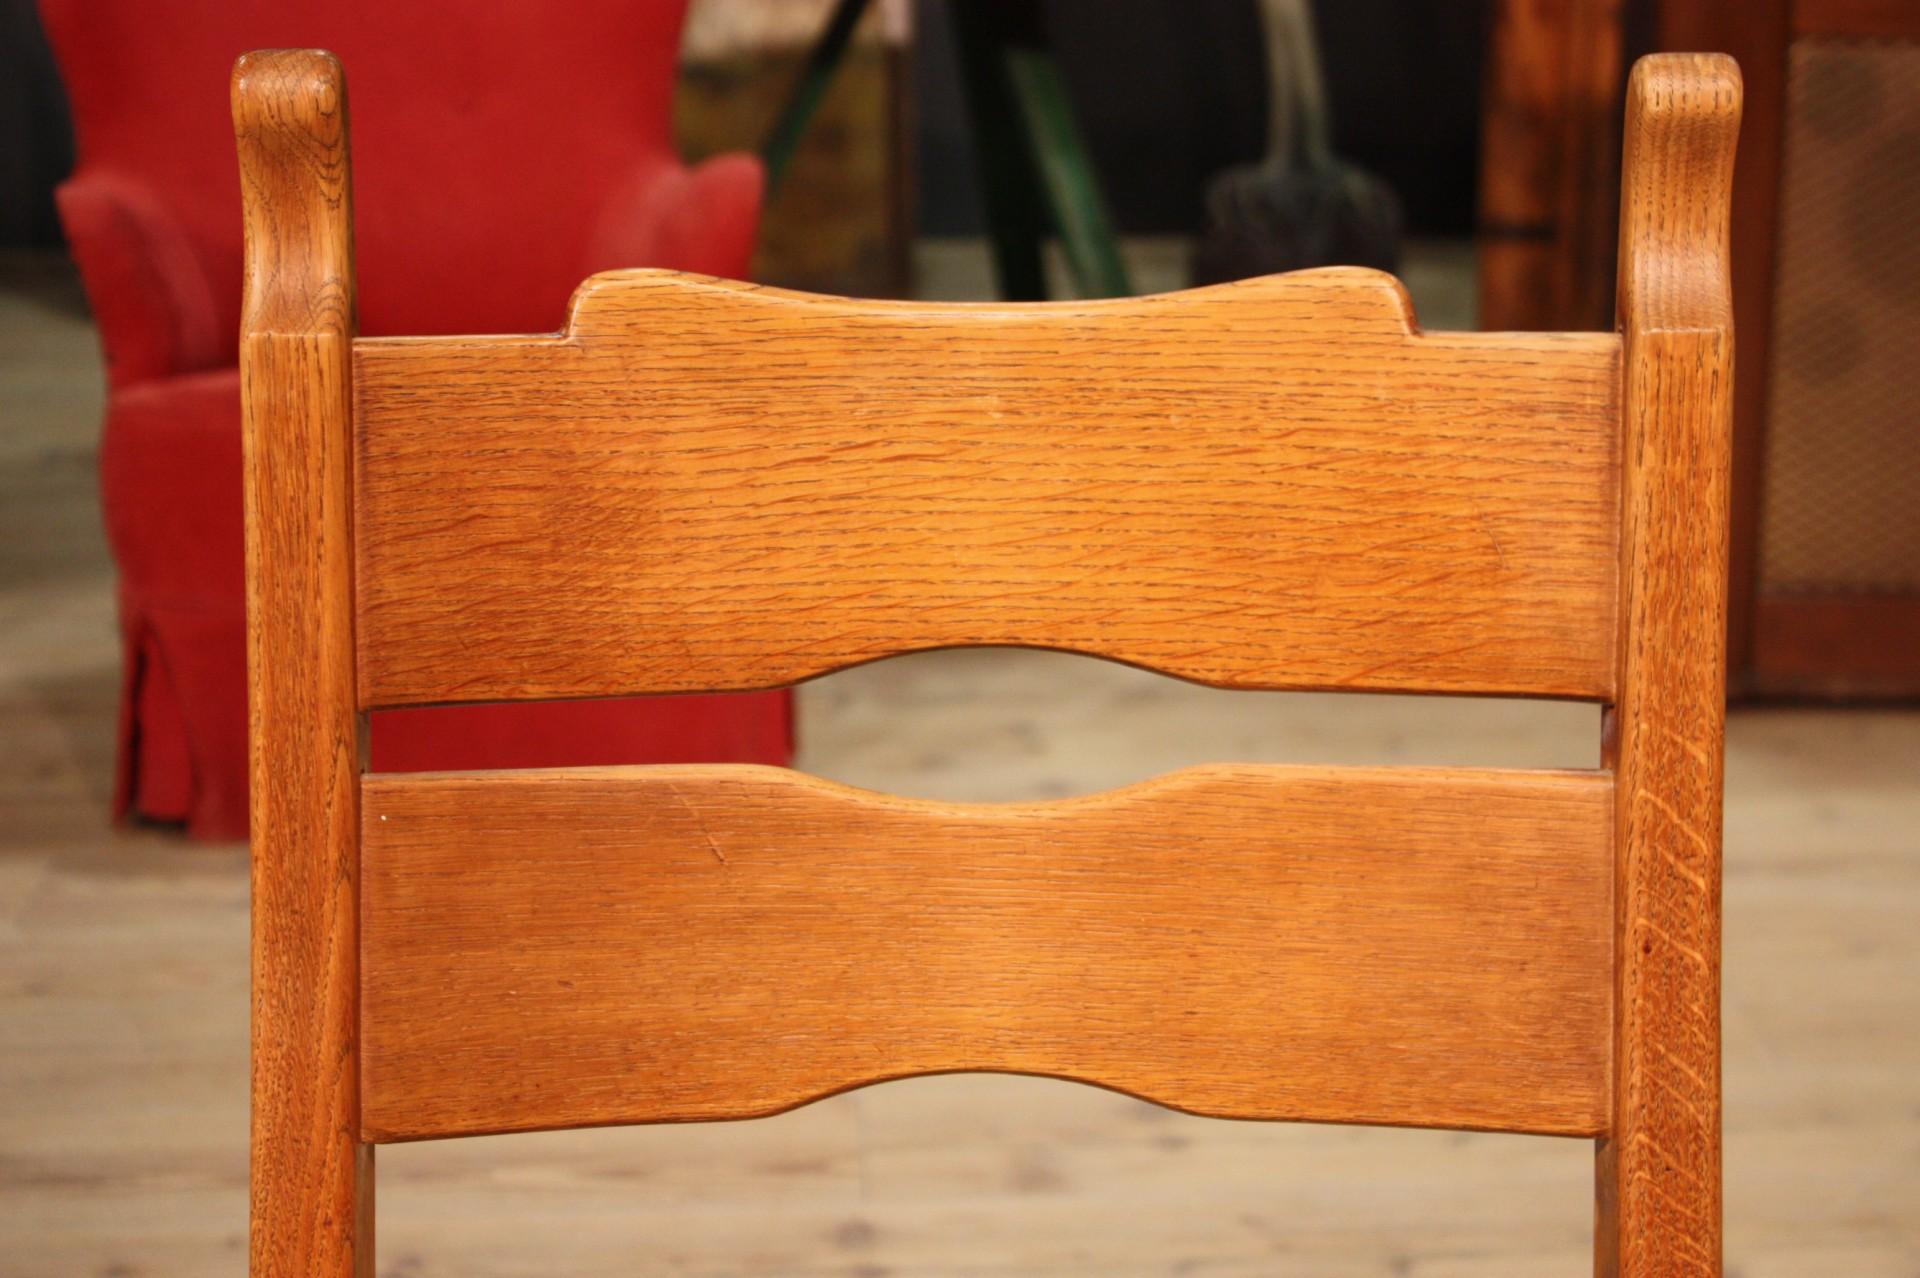 Wood Group of 4 Rustic Northern European Chairs, 20th Century For Sale